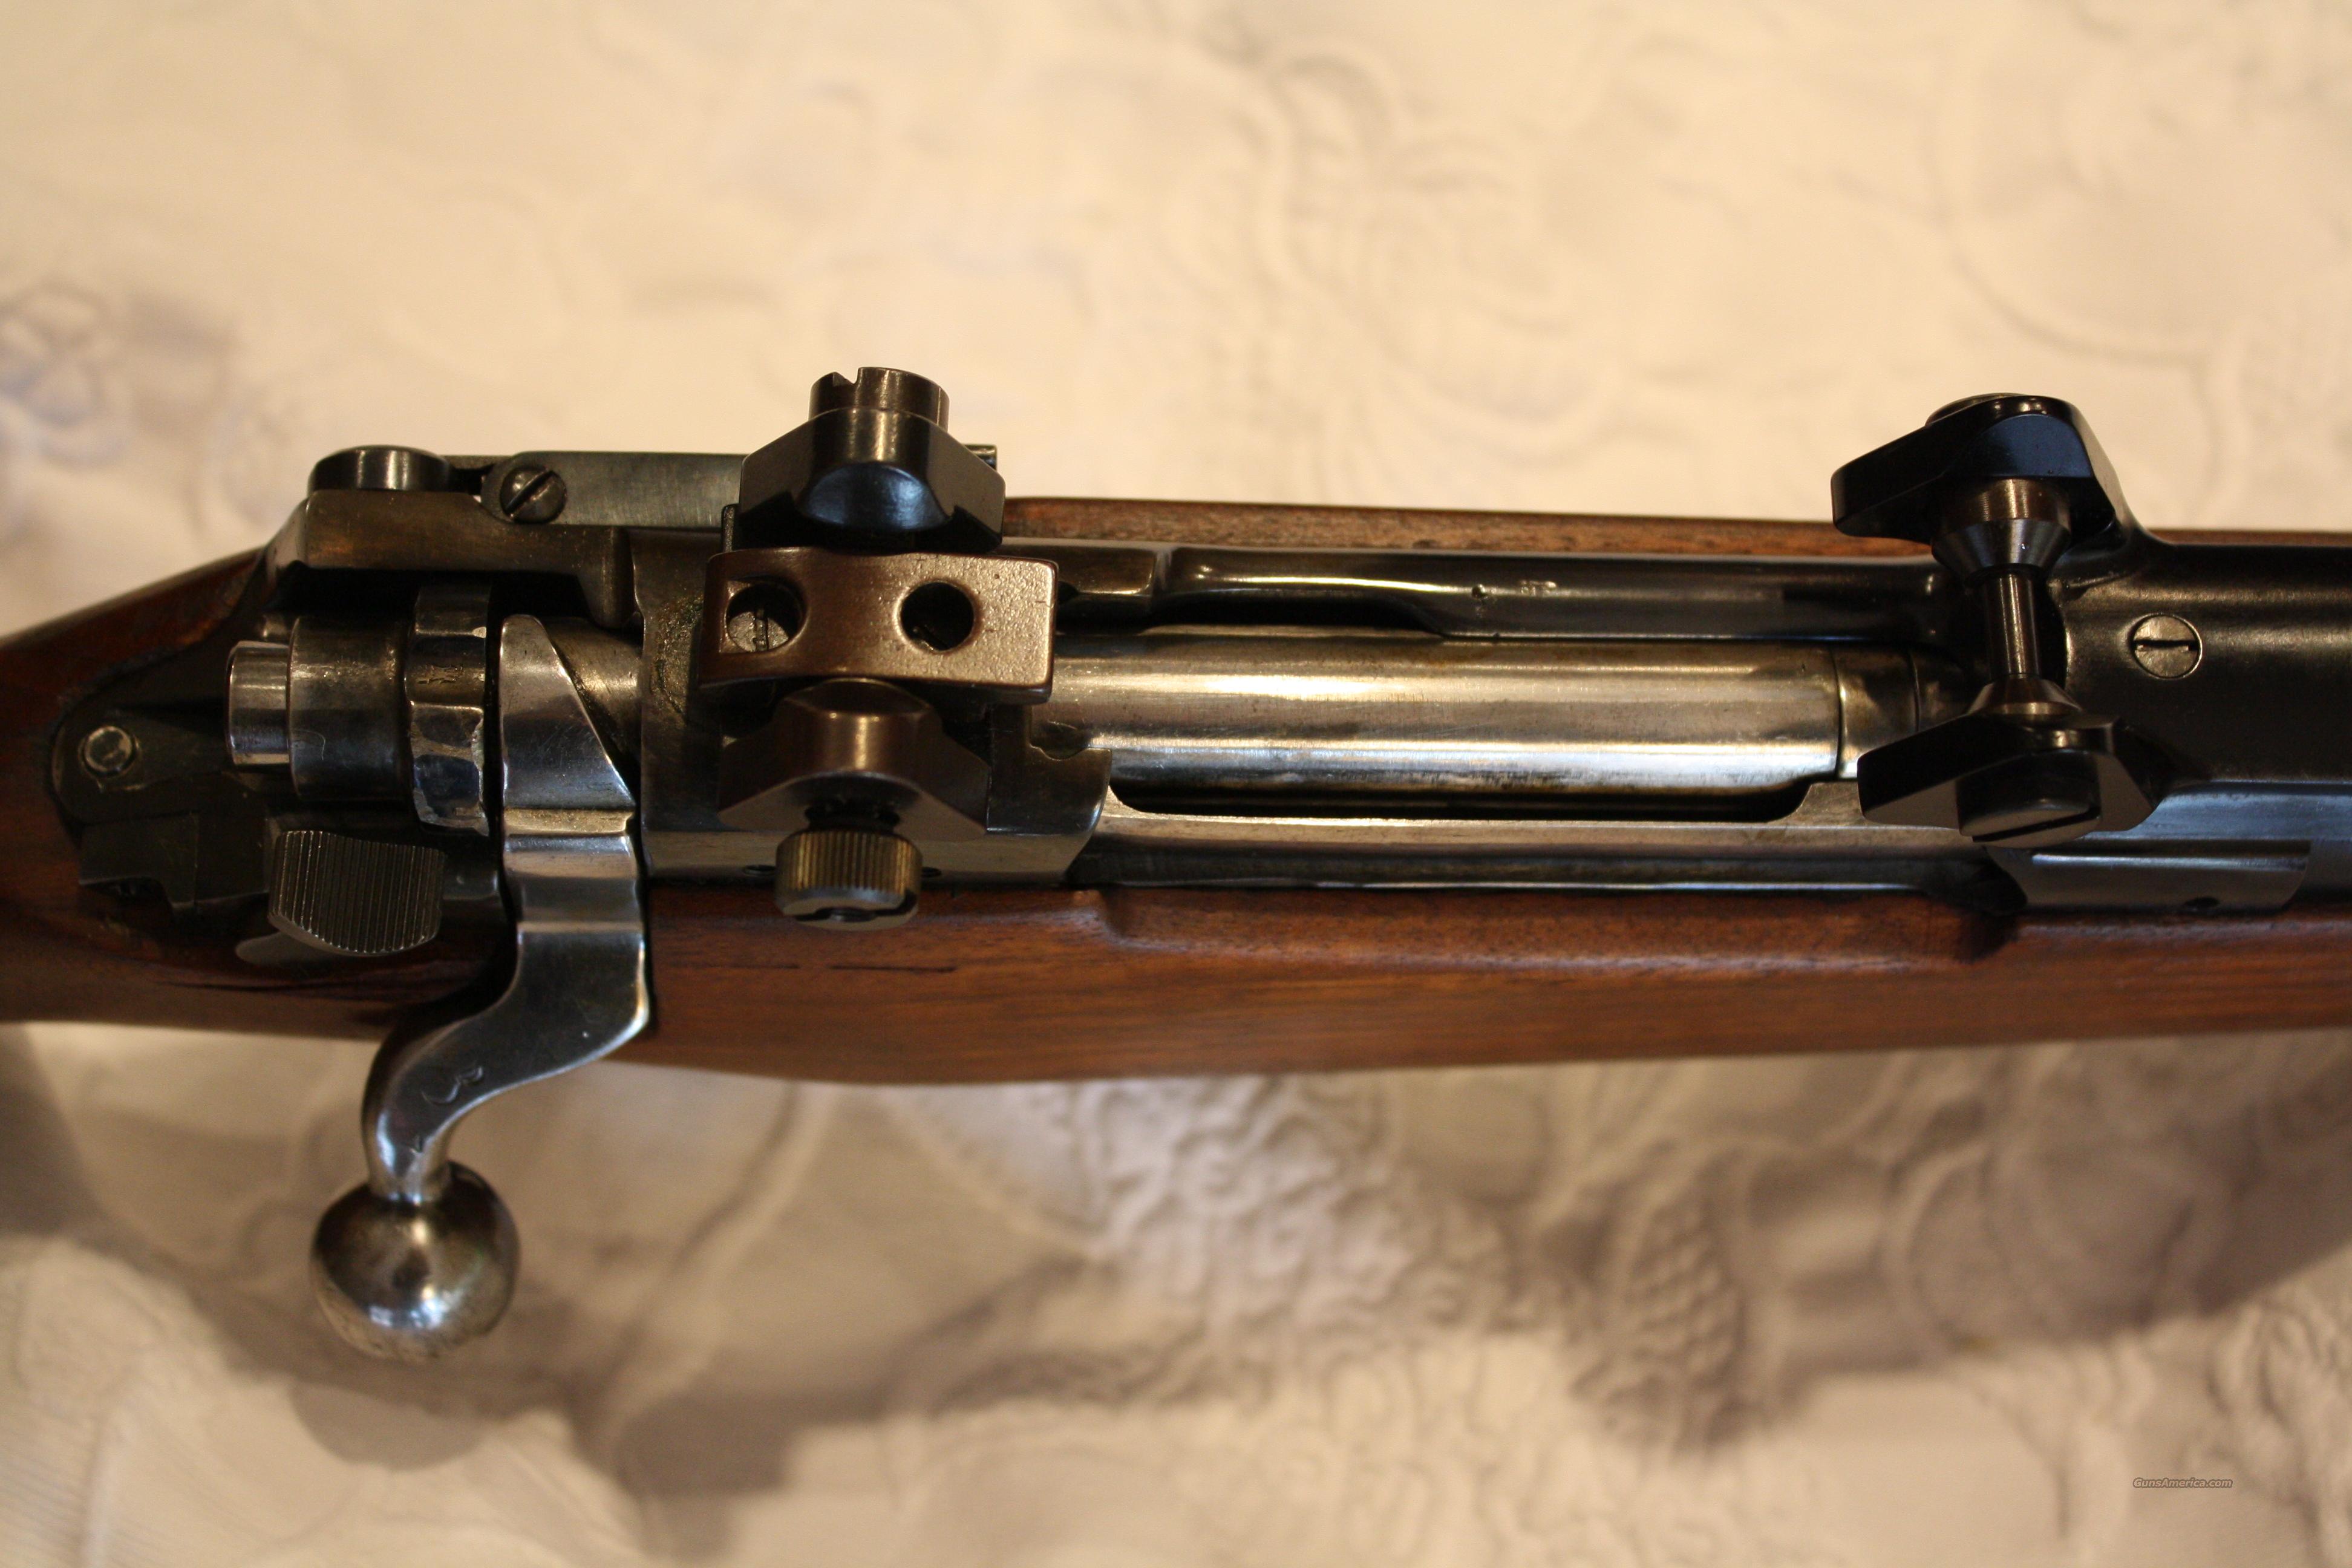 M1917 Enfield Hunting Rifle 10 Images - 7 Military Surplus G